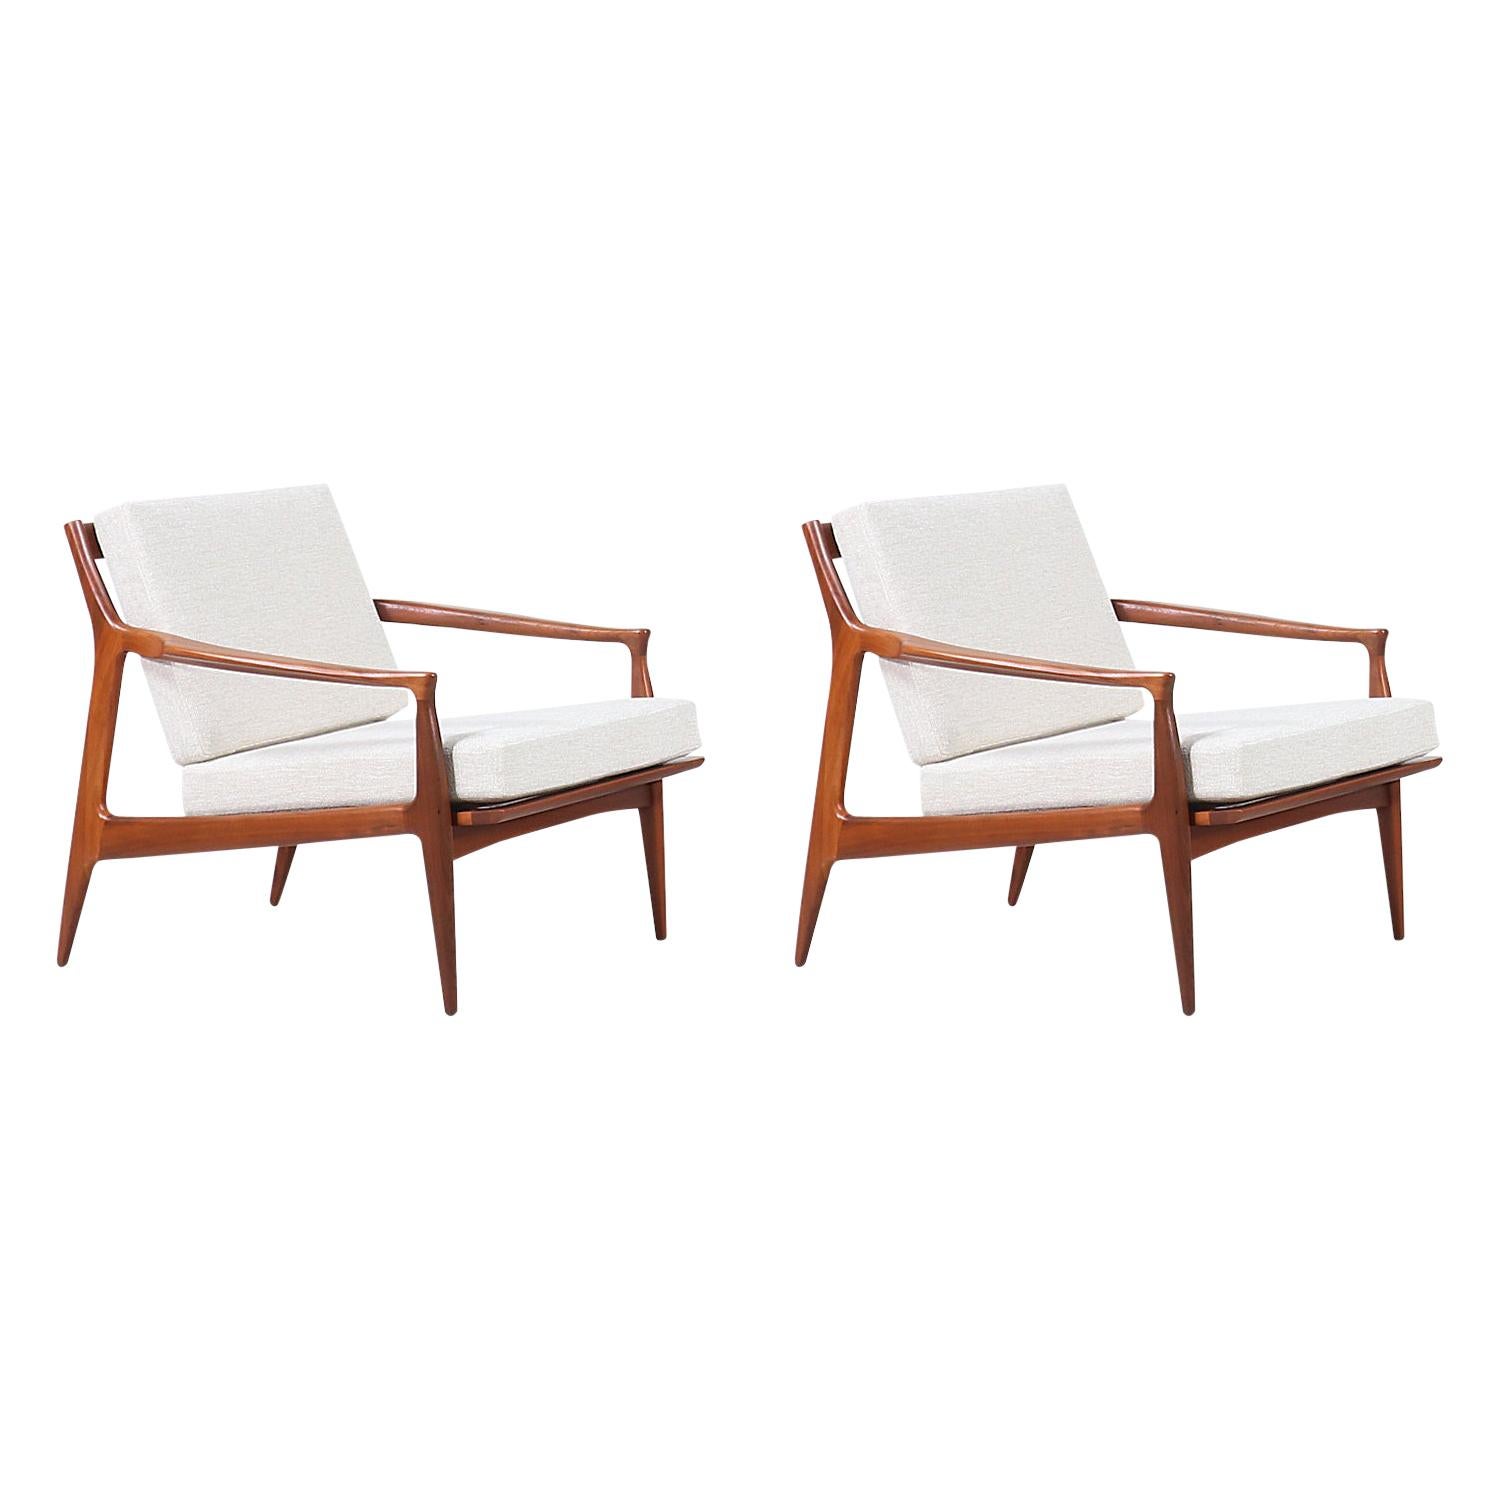 Milo Baughman Sculpted Walnut Lounge Chairs for Thayer Coggin